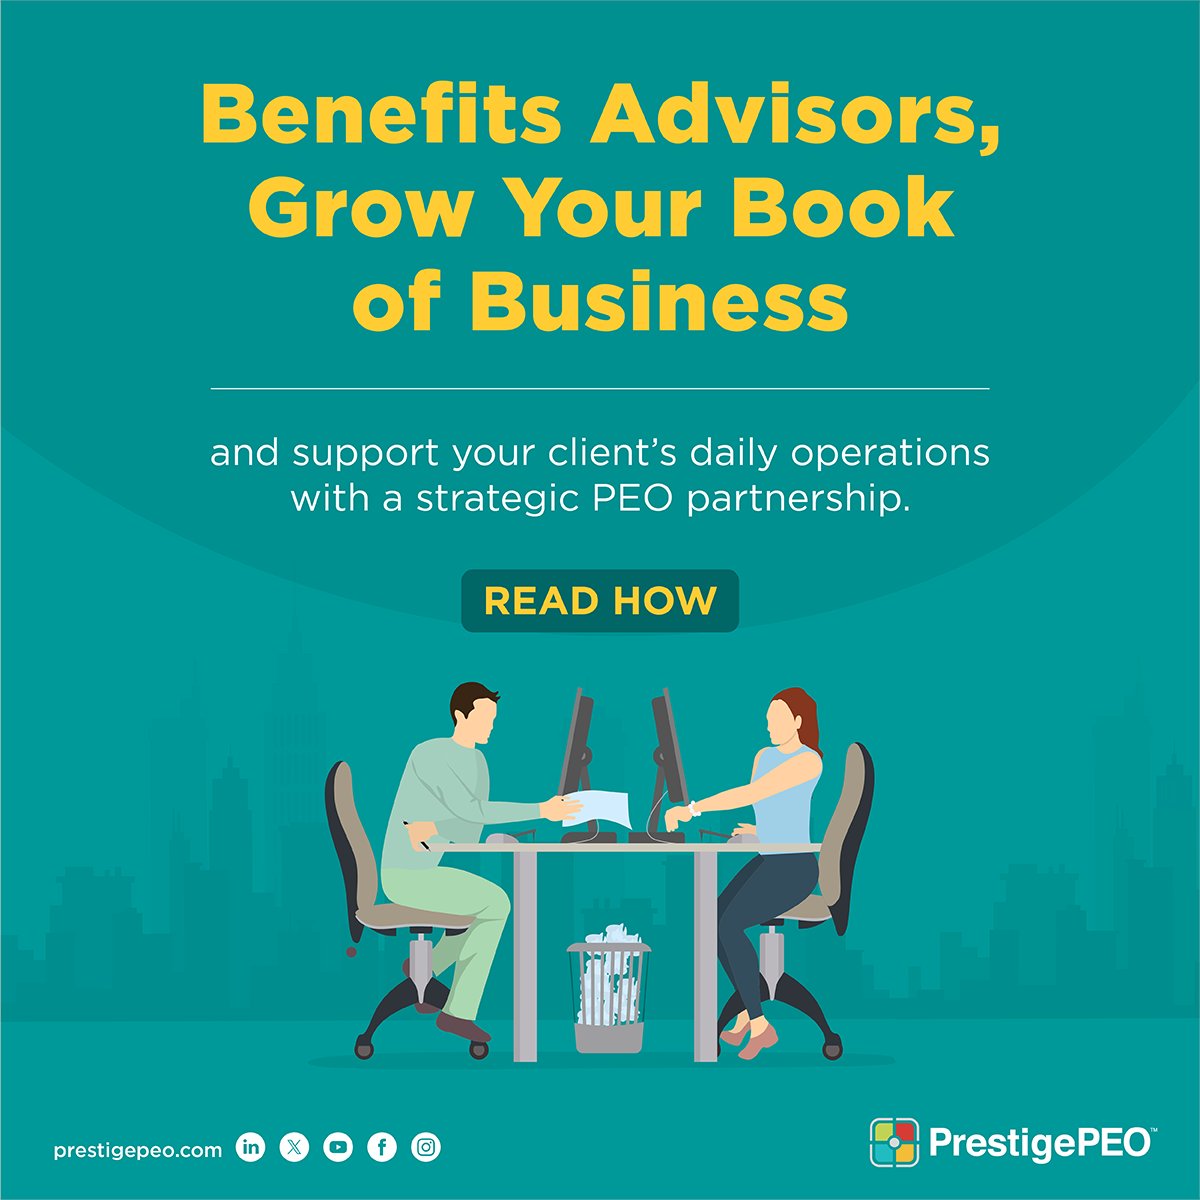 #BenefitsAdvisors, grow your book of business by offering clients comprehensive benefits and expert HR admin services through a strategic #PEO partnership. Together, we can shape the future of #EmployeeBenefits and support daily client operations Read how: bit.ly/3xJShzv